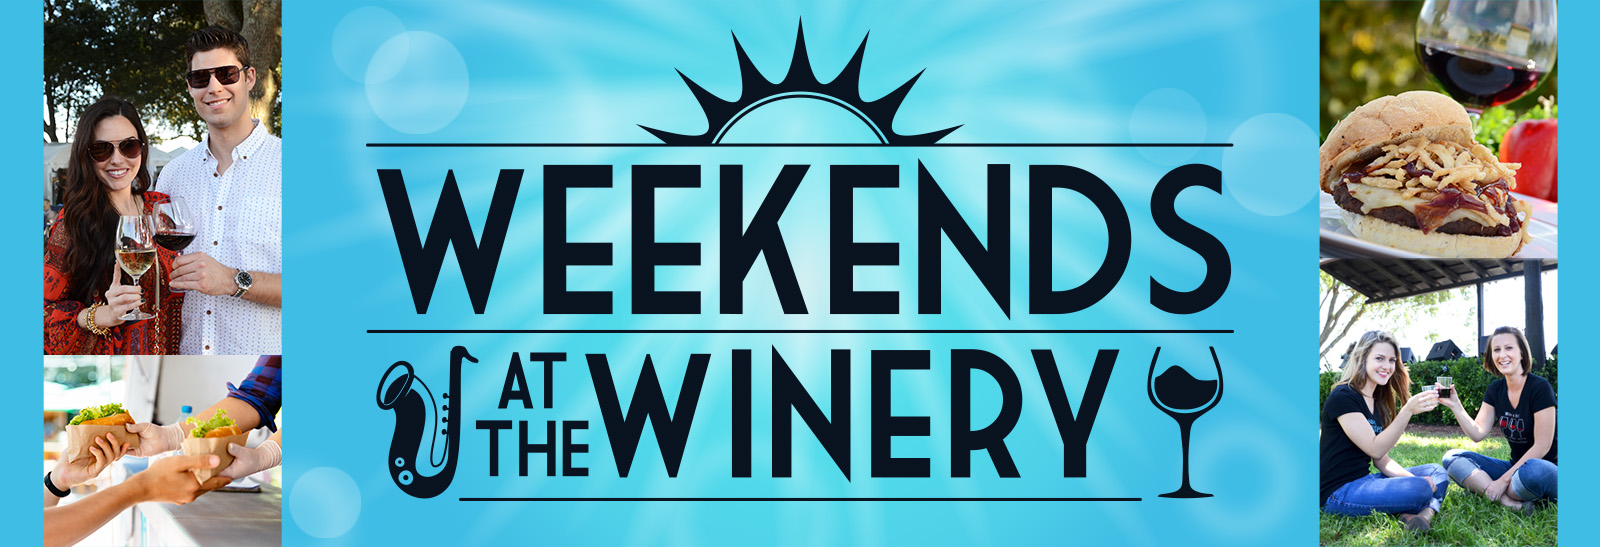 Weekends at the Winery logo with photos of people enjoying and food wine